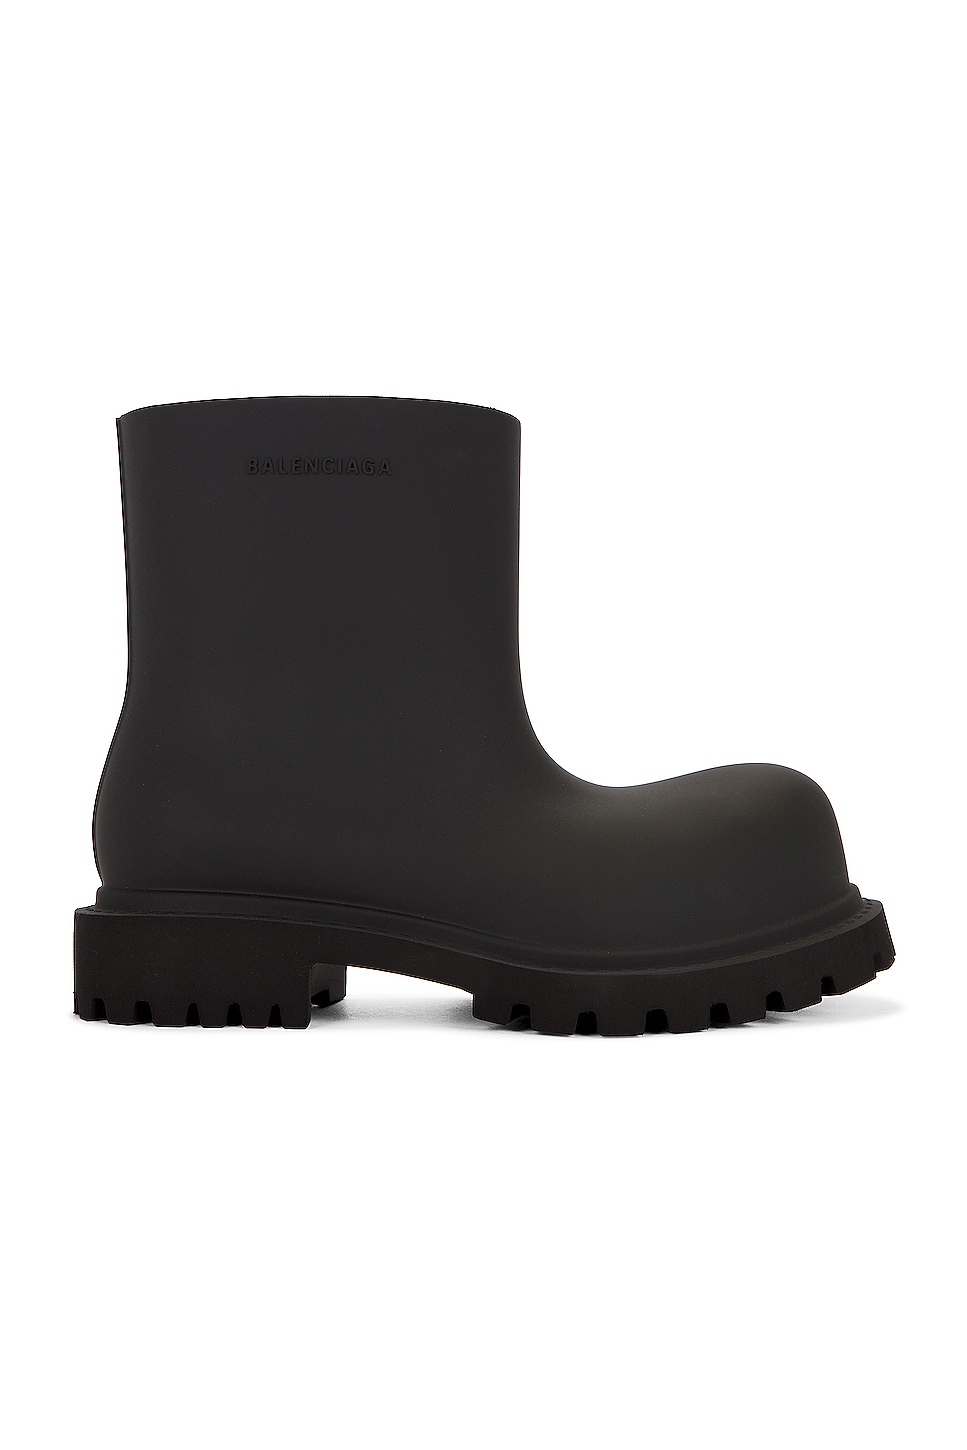 Image 1 of Balenciaga Steroid Bootie in Black